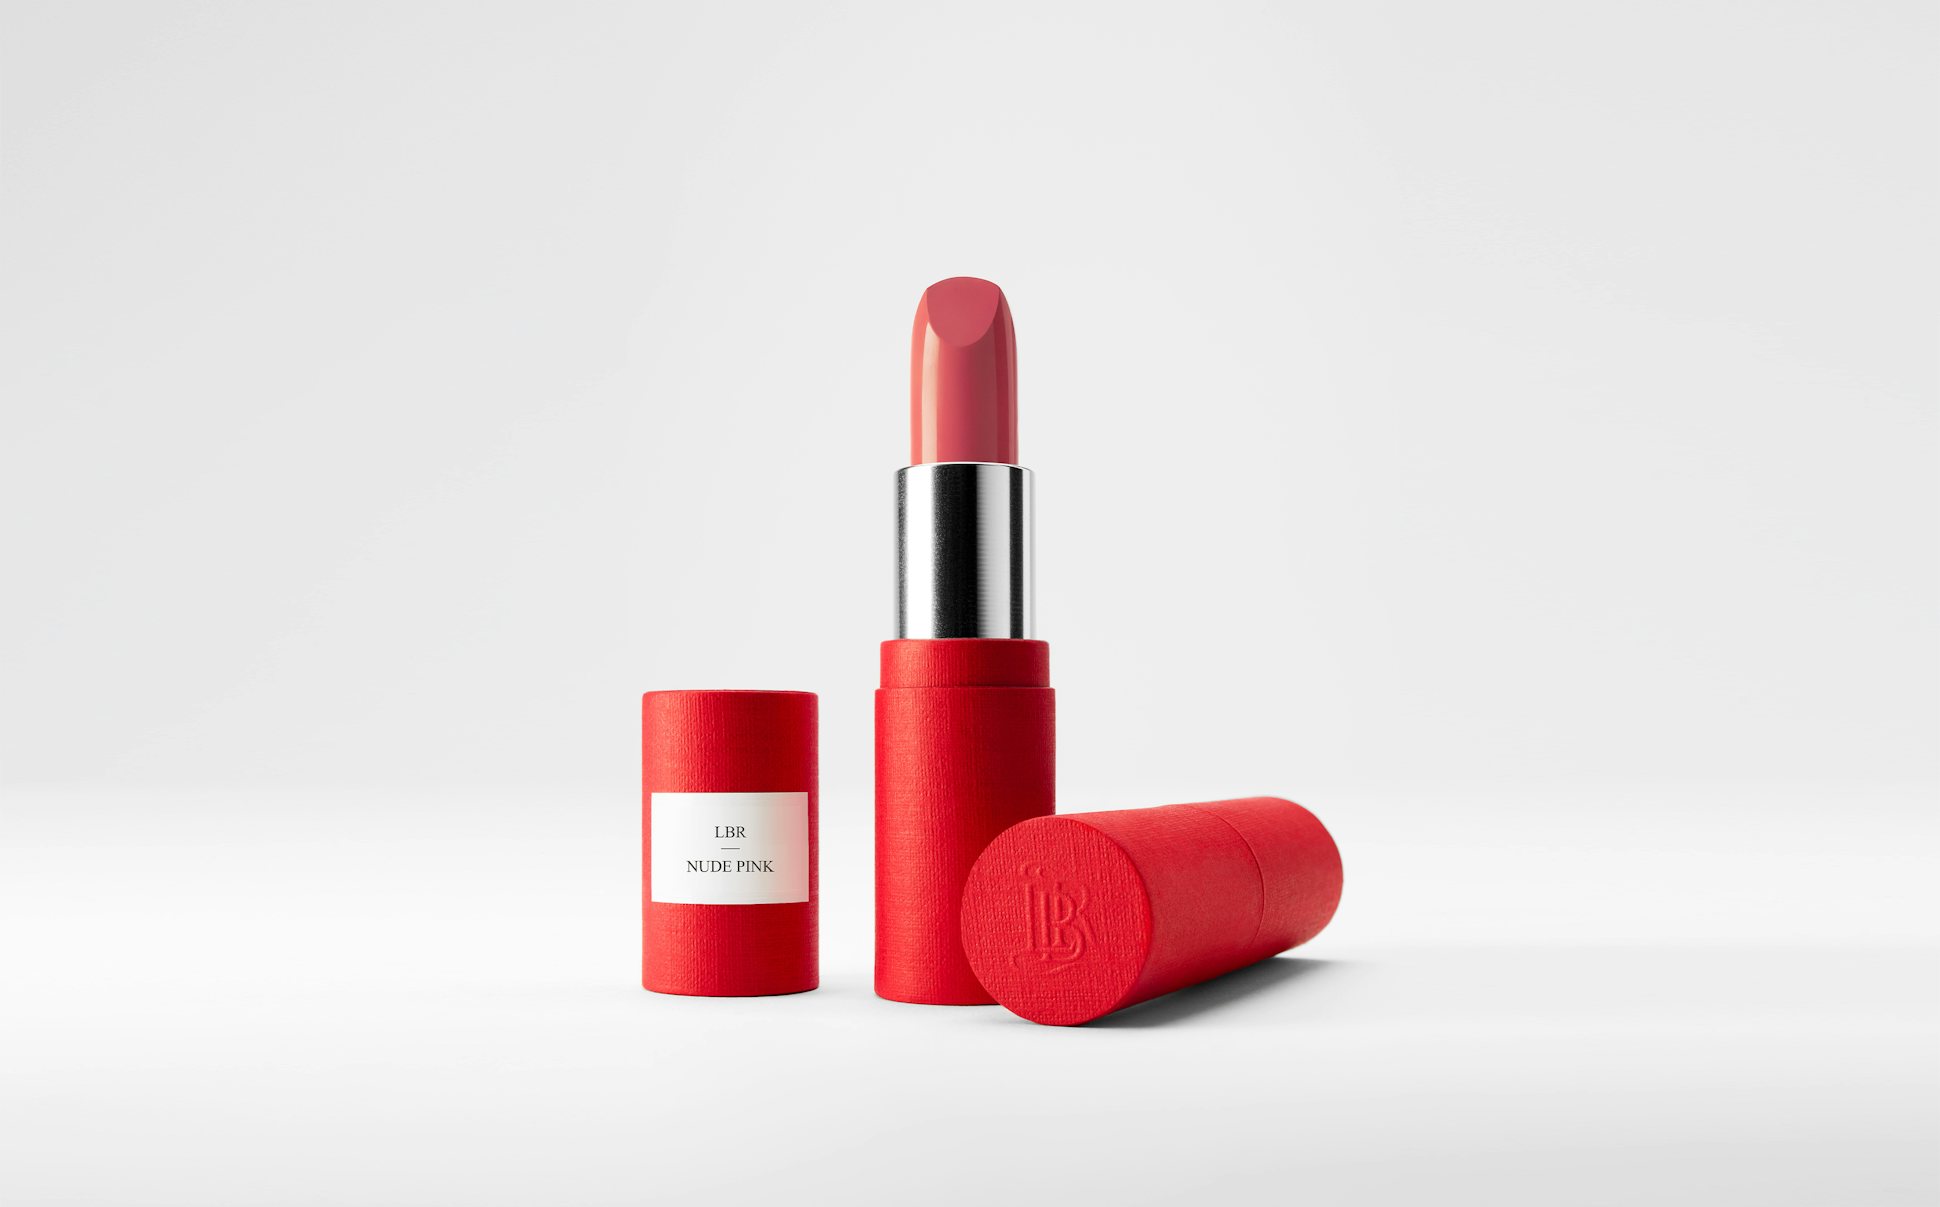 La bouche rouge Nude Pink lipstick in the red paper case